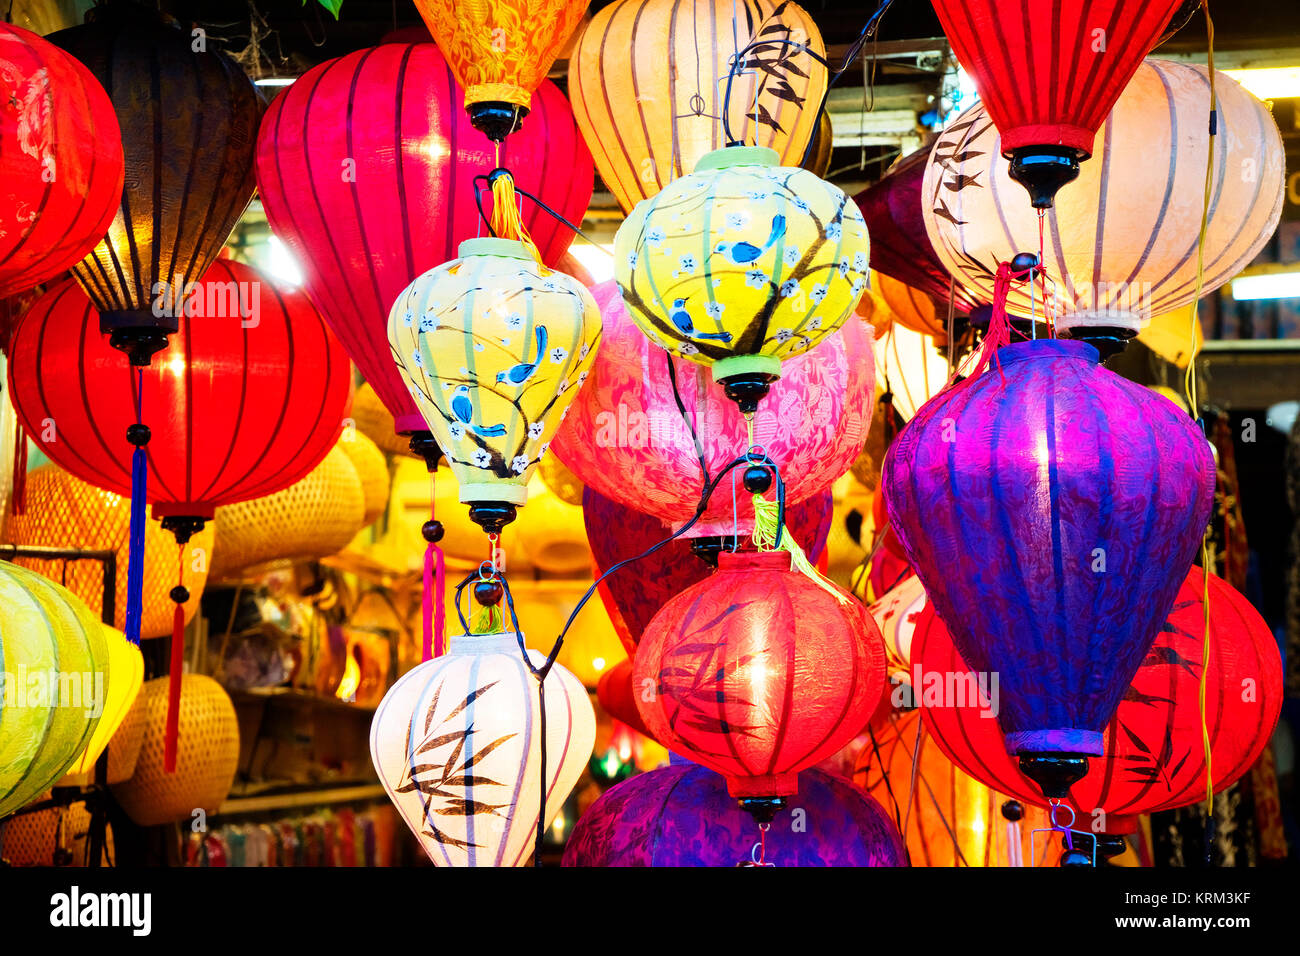 Colorful lanterns spread light on the old street of Hoi An Ancient Town - UNESCO World Heritage Site. Vietnam. Stock Photo